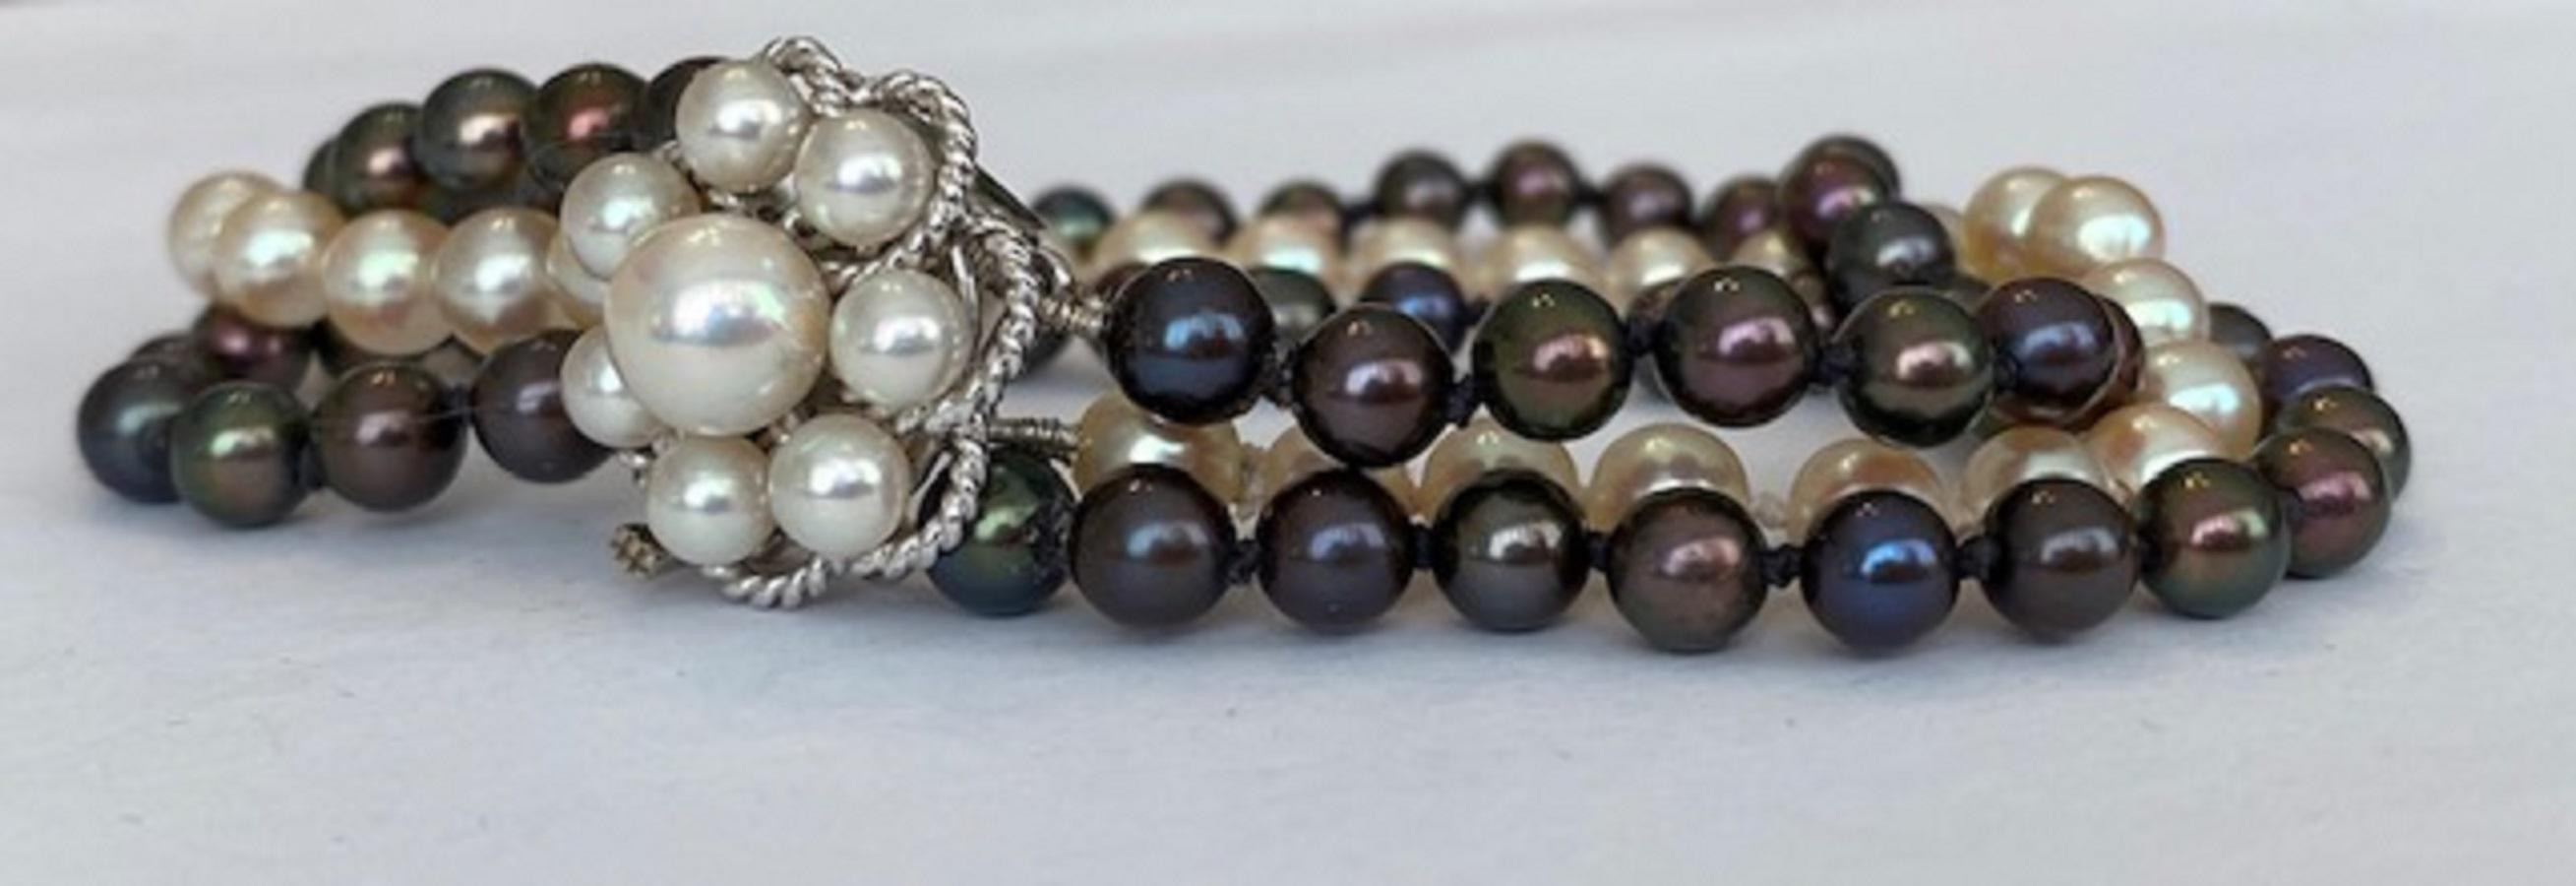 Pearl Bracelet Circa 1970 s Cultured Pearls Gold Clasp For Sale 1